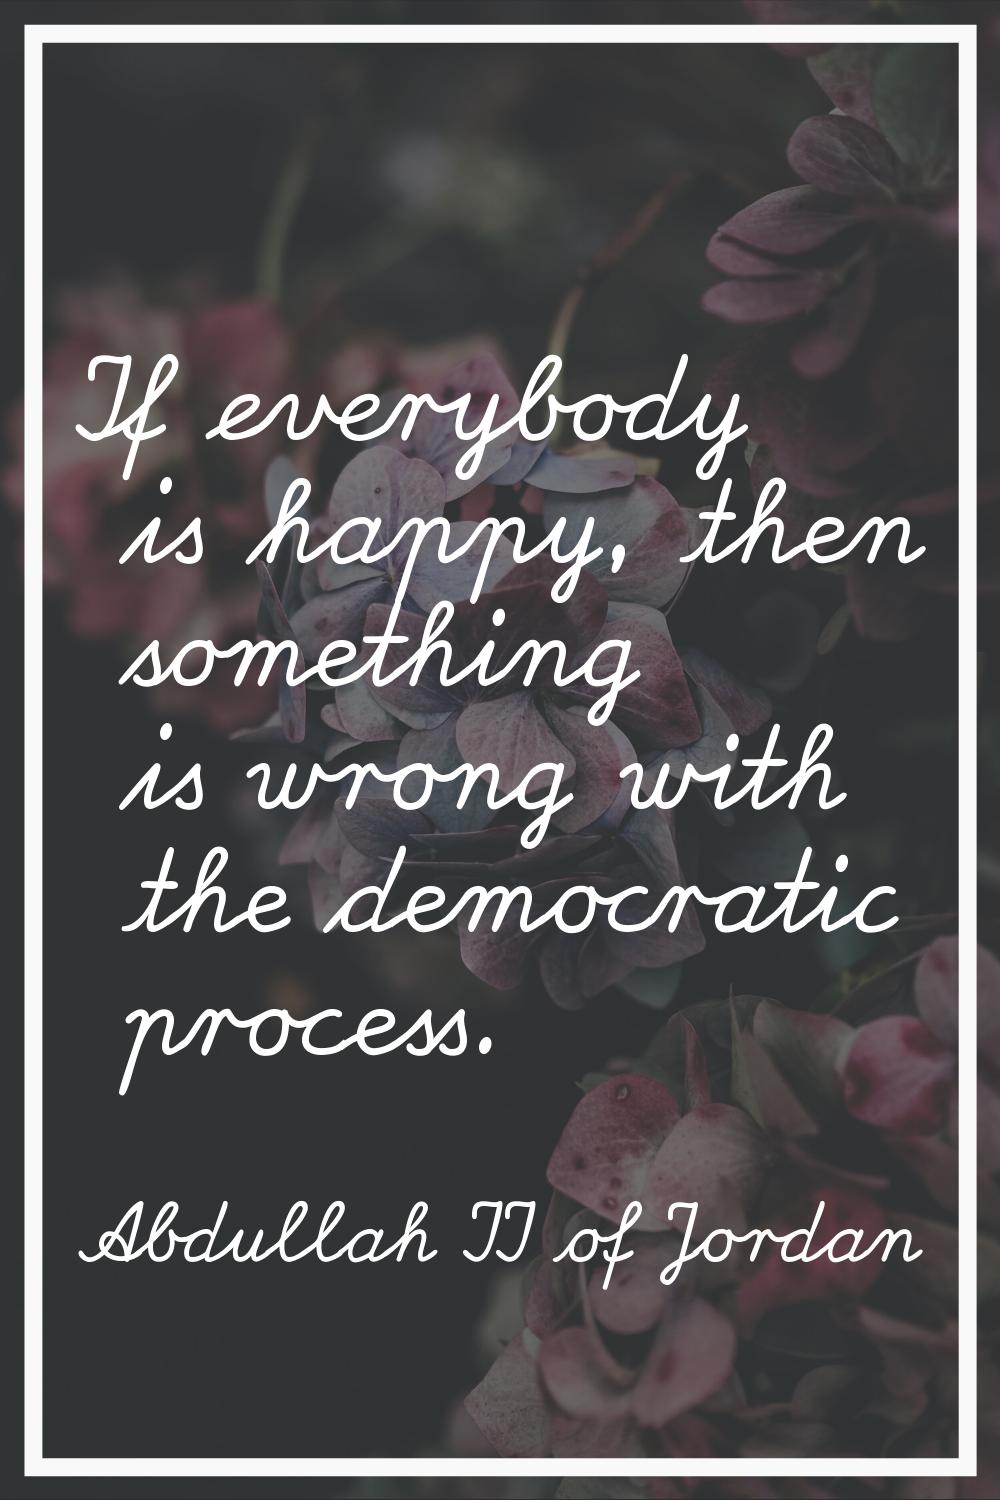 If everybody is happy, then something is wrong with the democratic process.